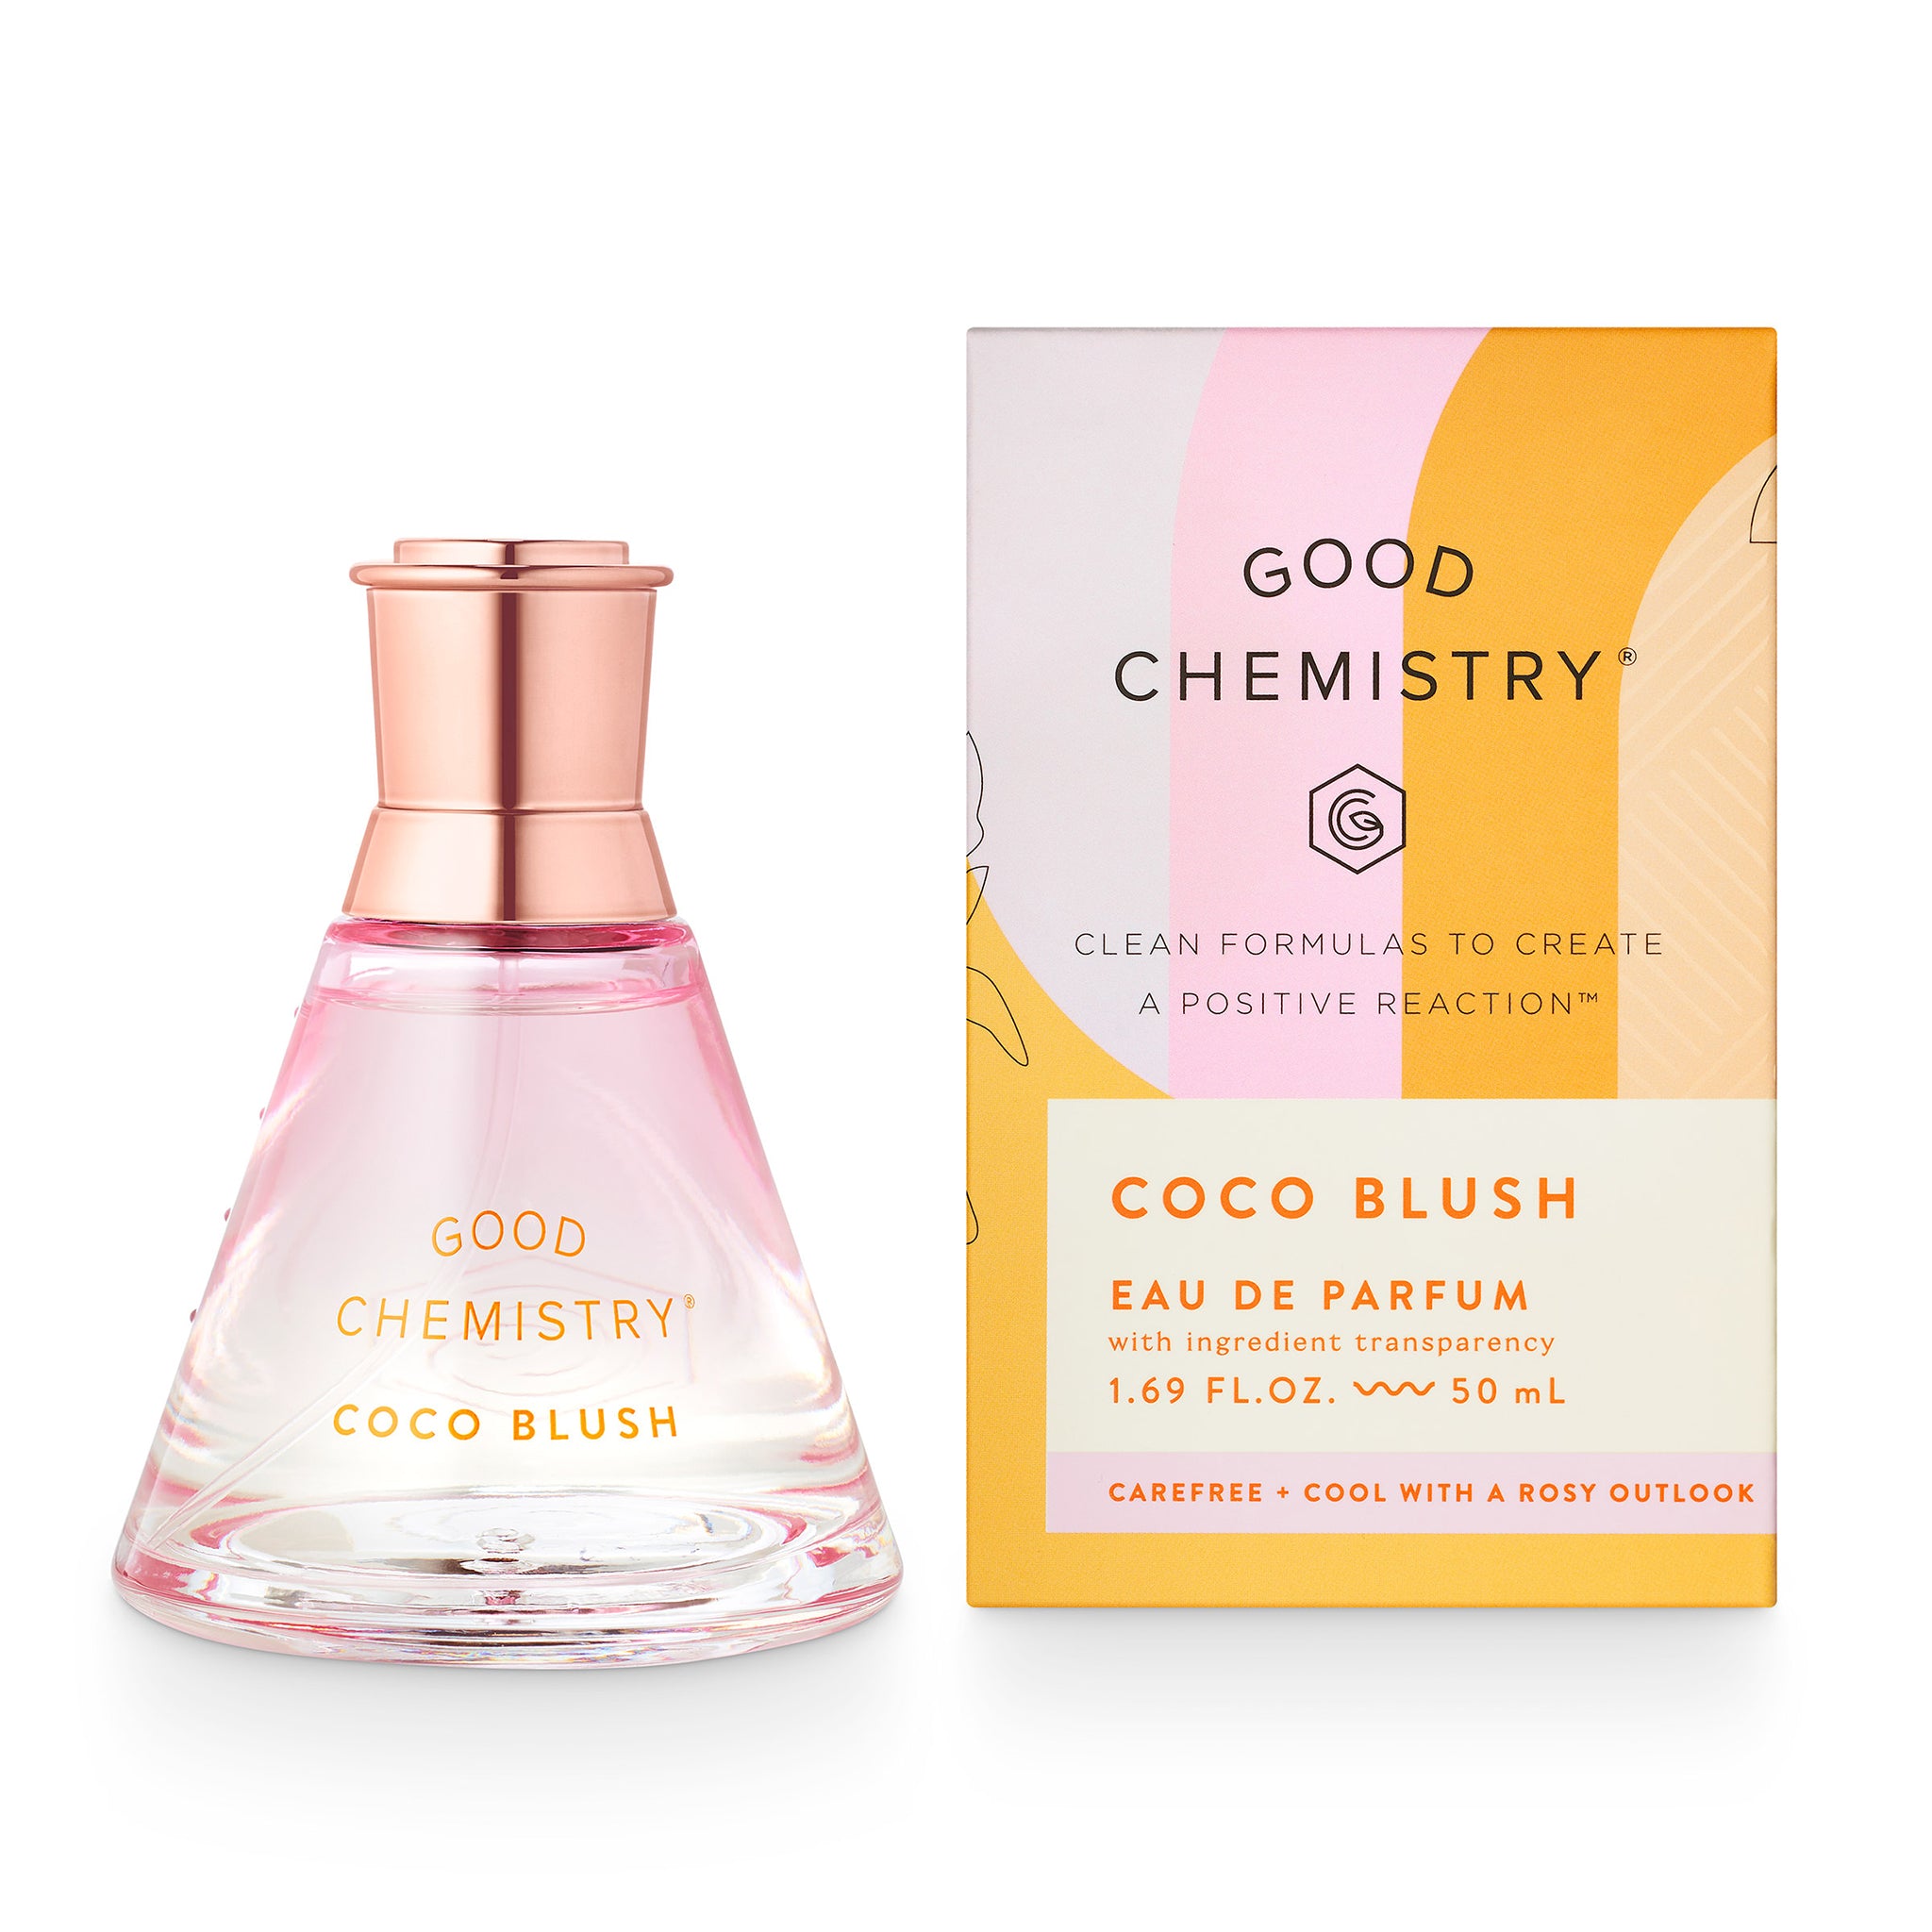 lotion for coco blush by good chemistry｜TikTok Search